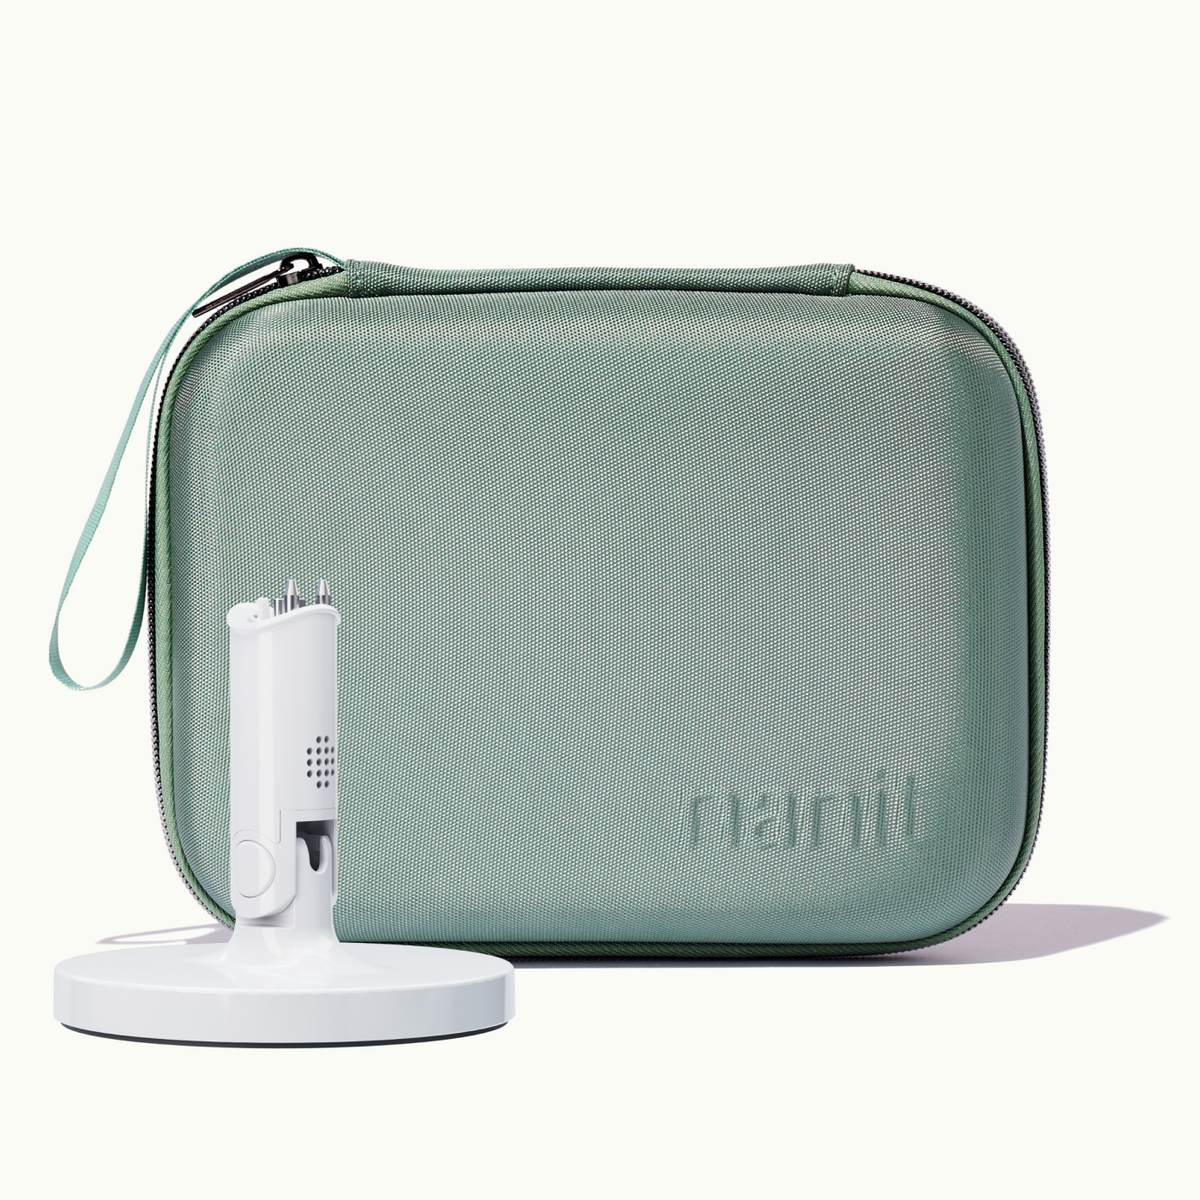 nanit flex stand and nanit green travel case #color_green